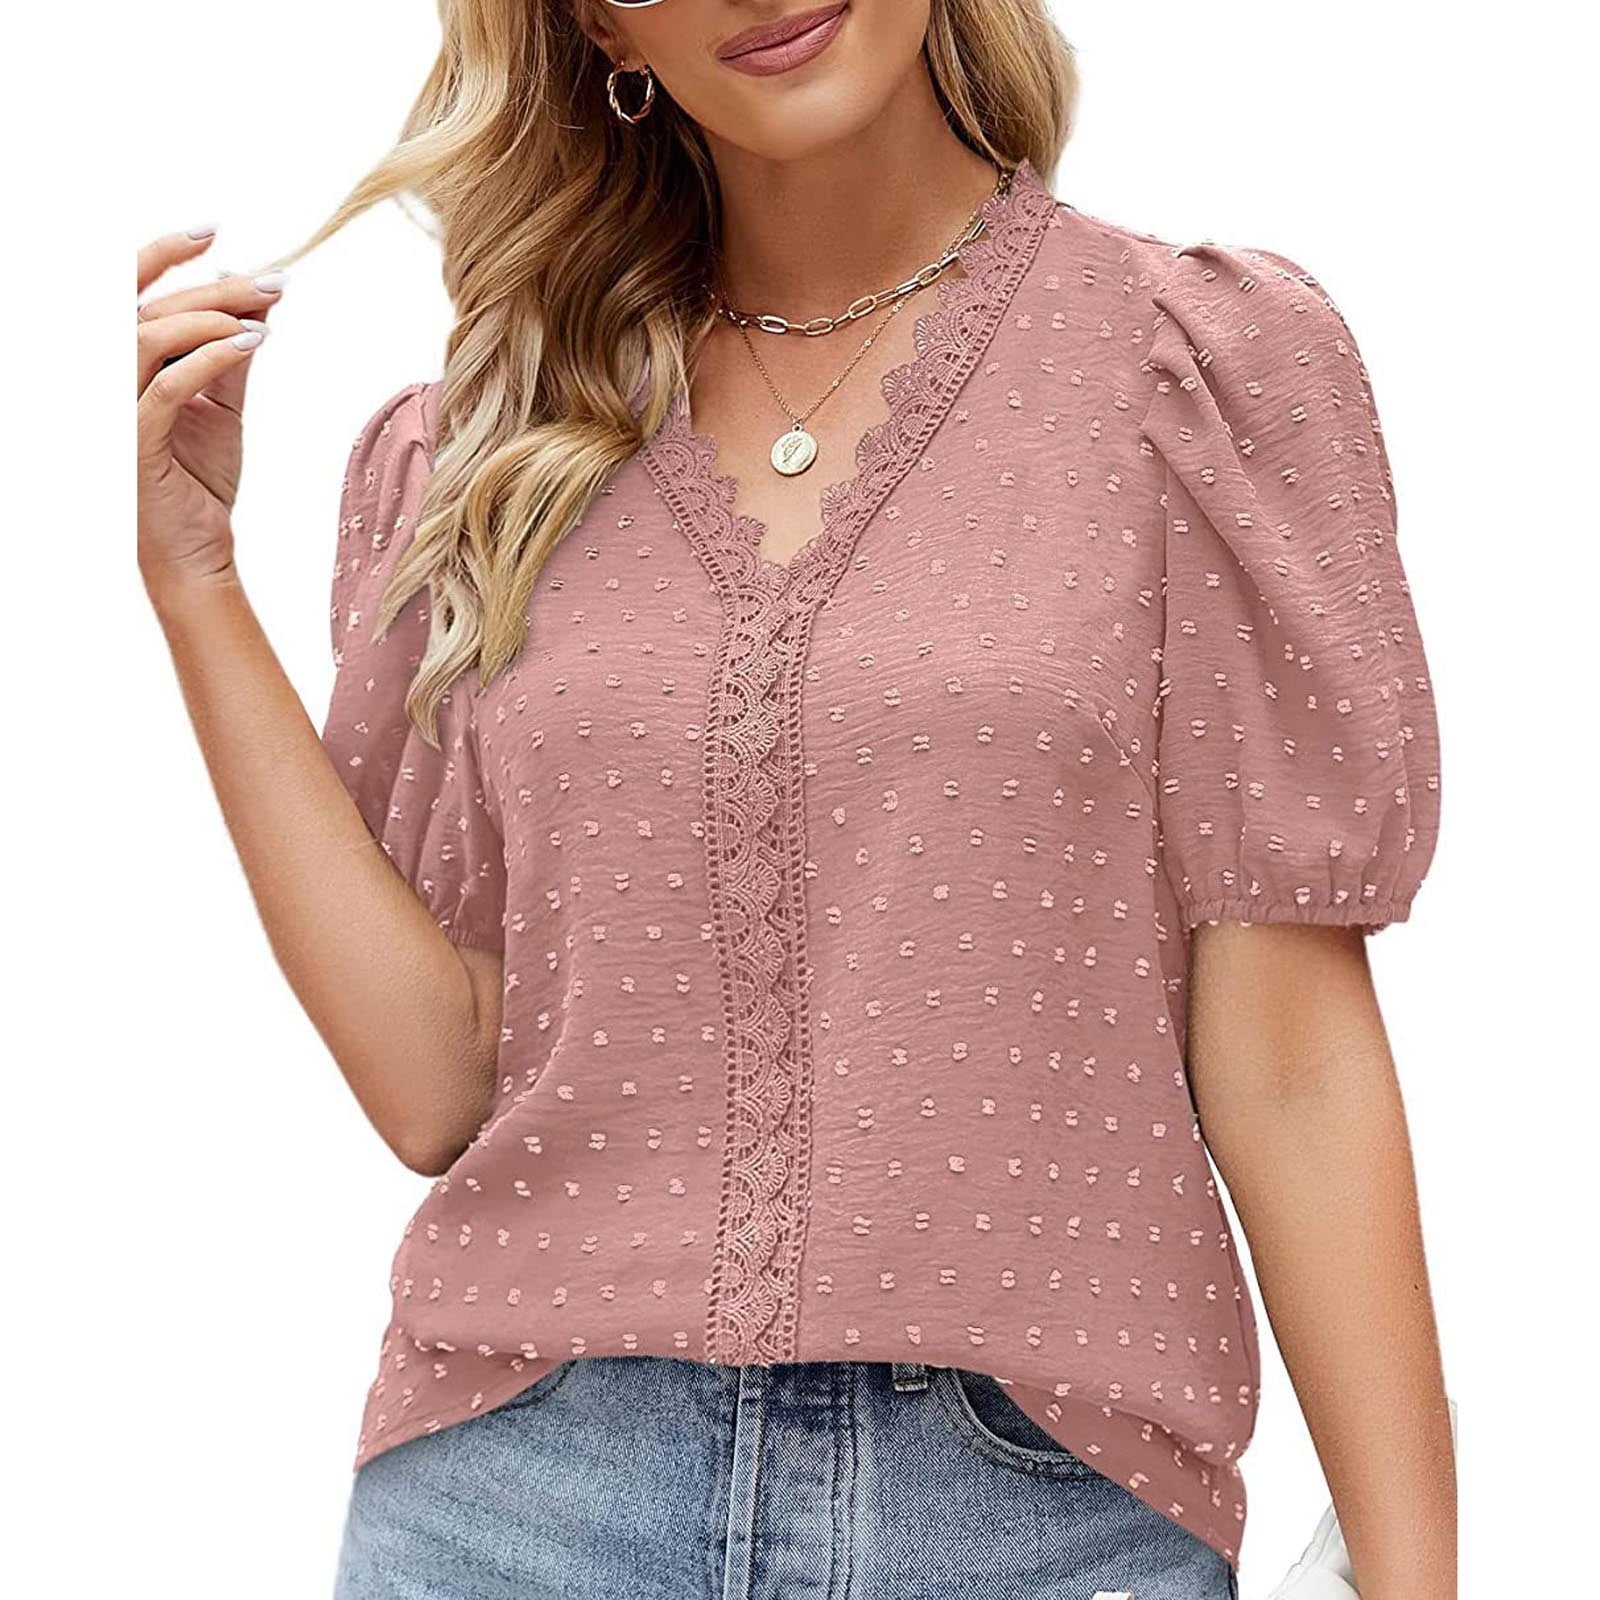 Vivianyo HD Women's Summer Tops on Clearance Women Casual Printing  Round-Neck Lace Hollow Out Short Sleeve Pullover Slimming Blouse T-shirt  Tops